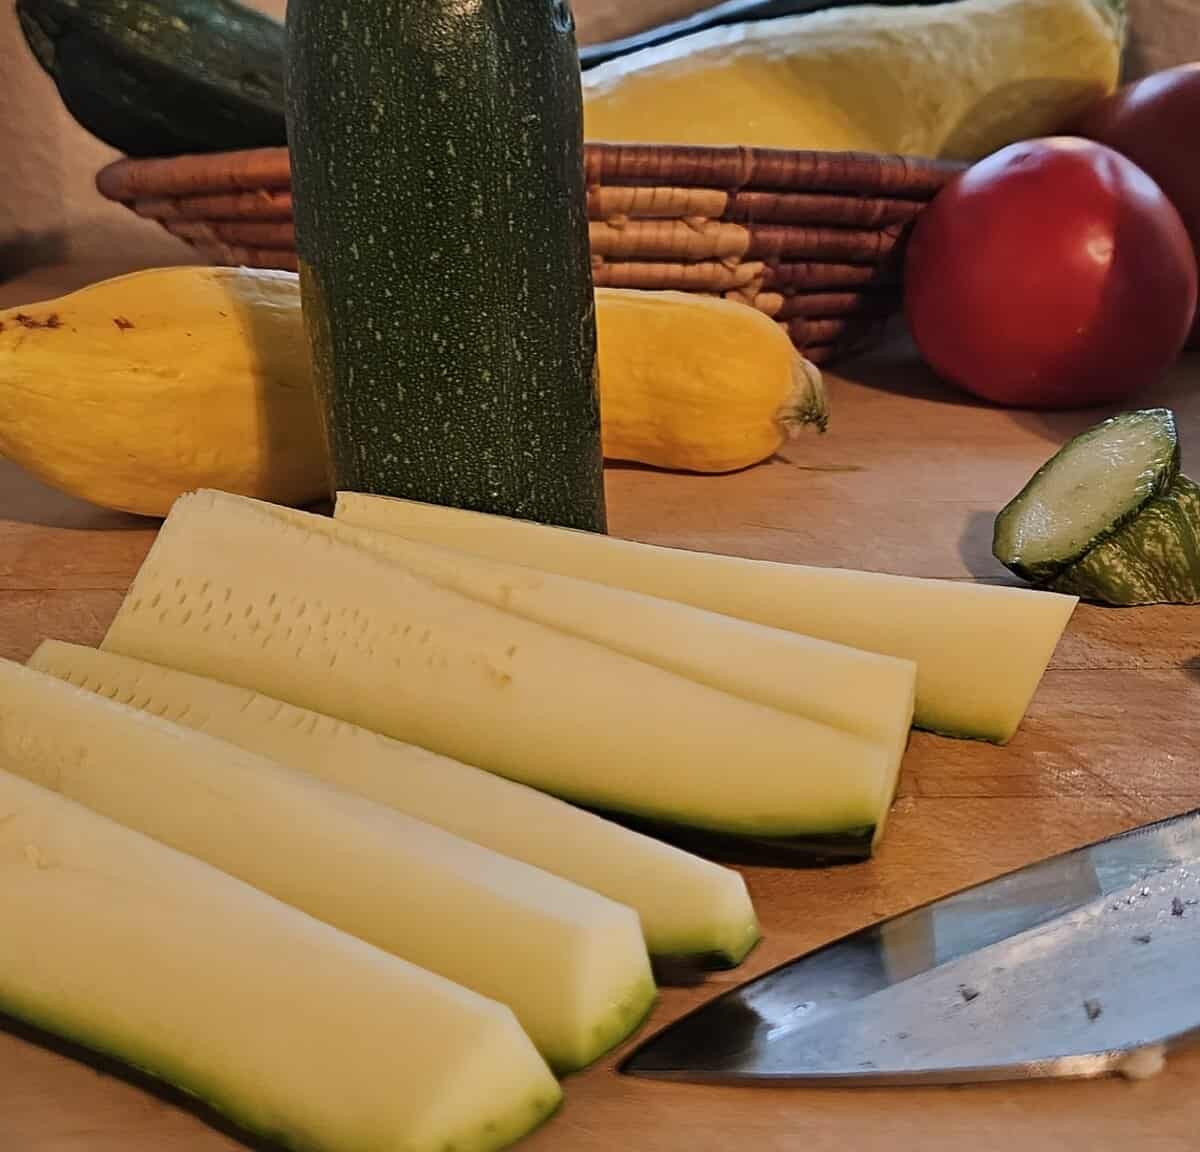 zucchini cut lengthwise into slices with a knife shown on a cutting board